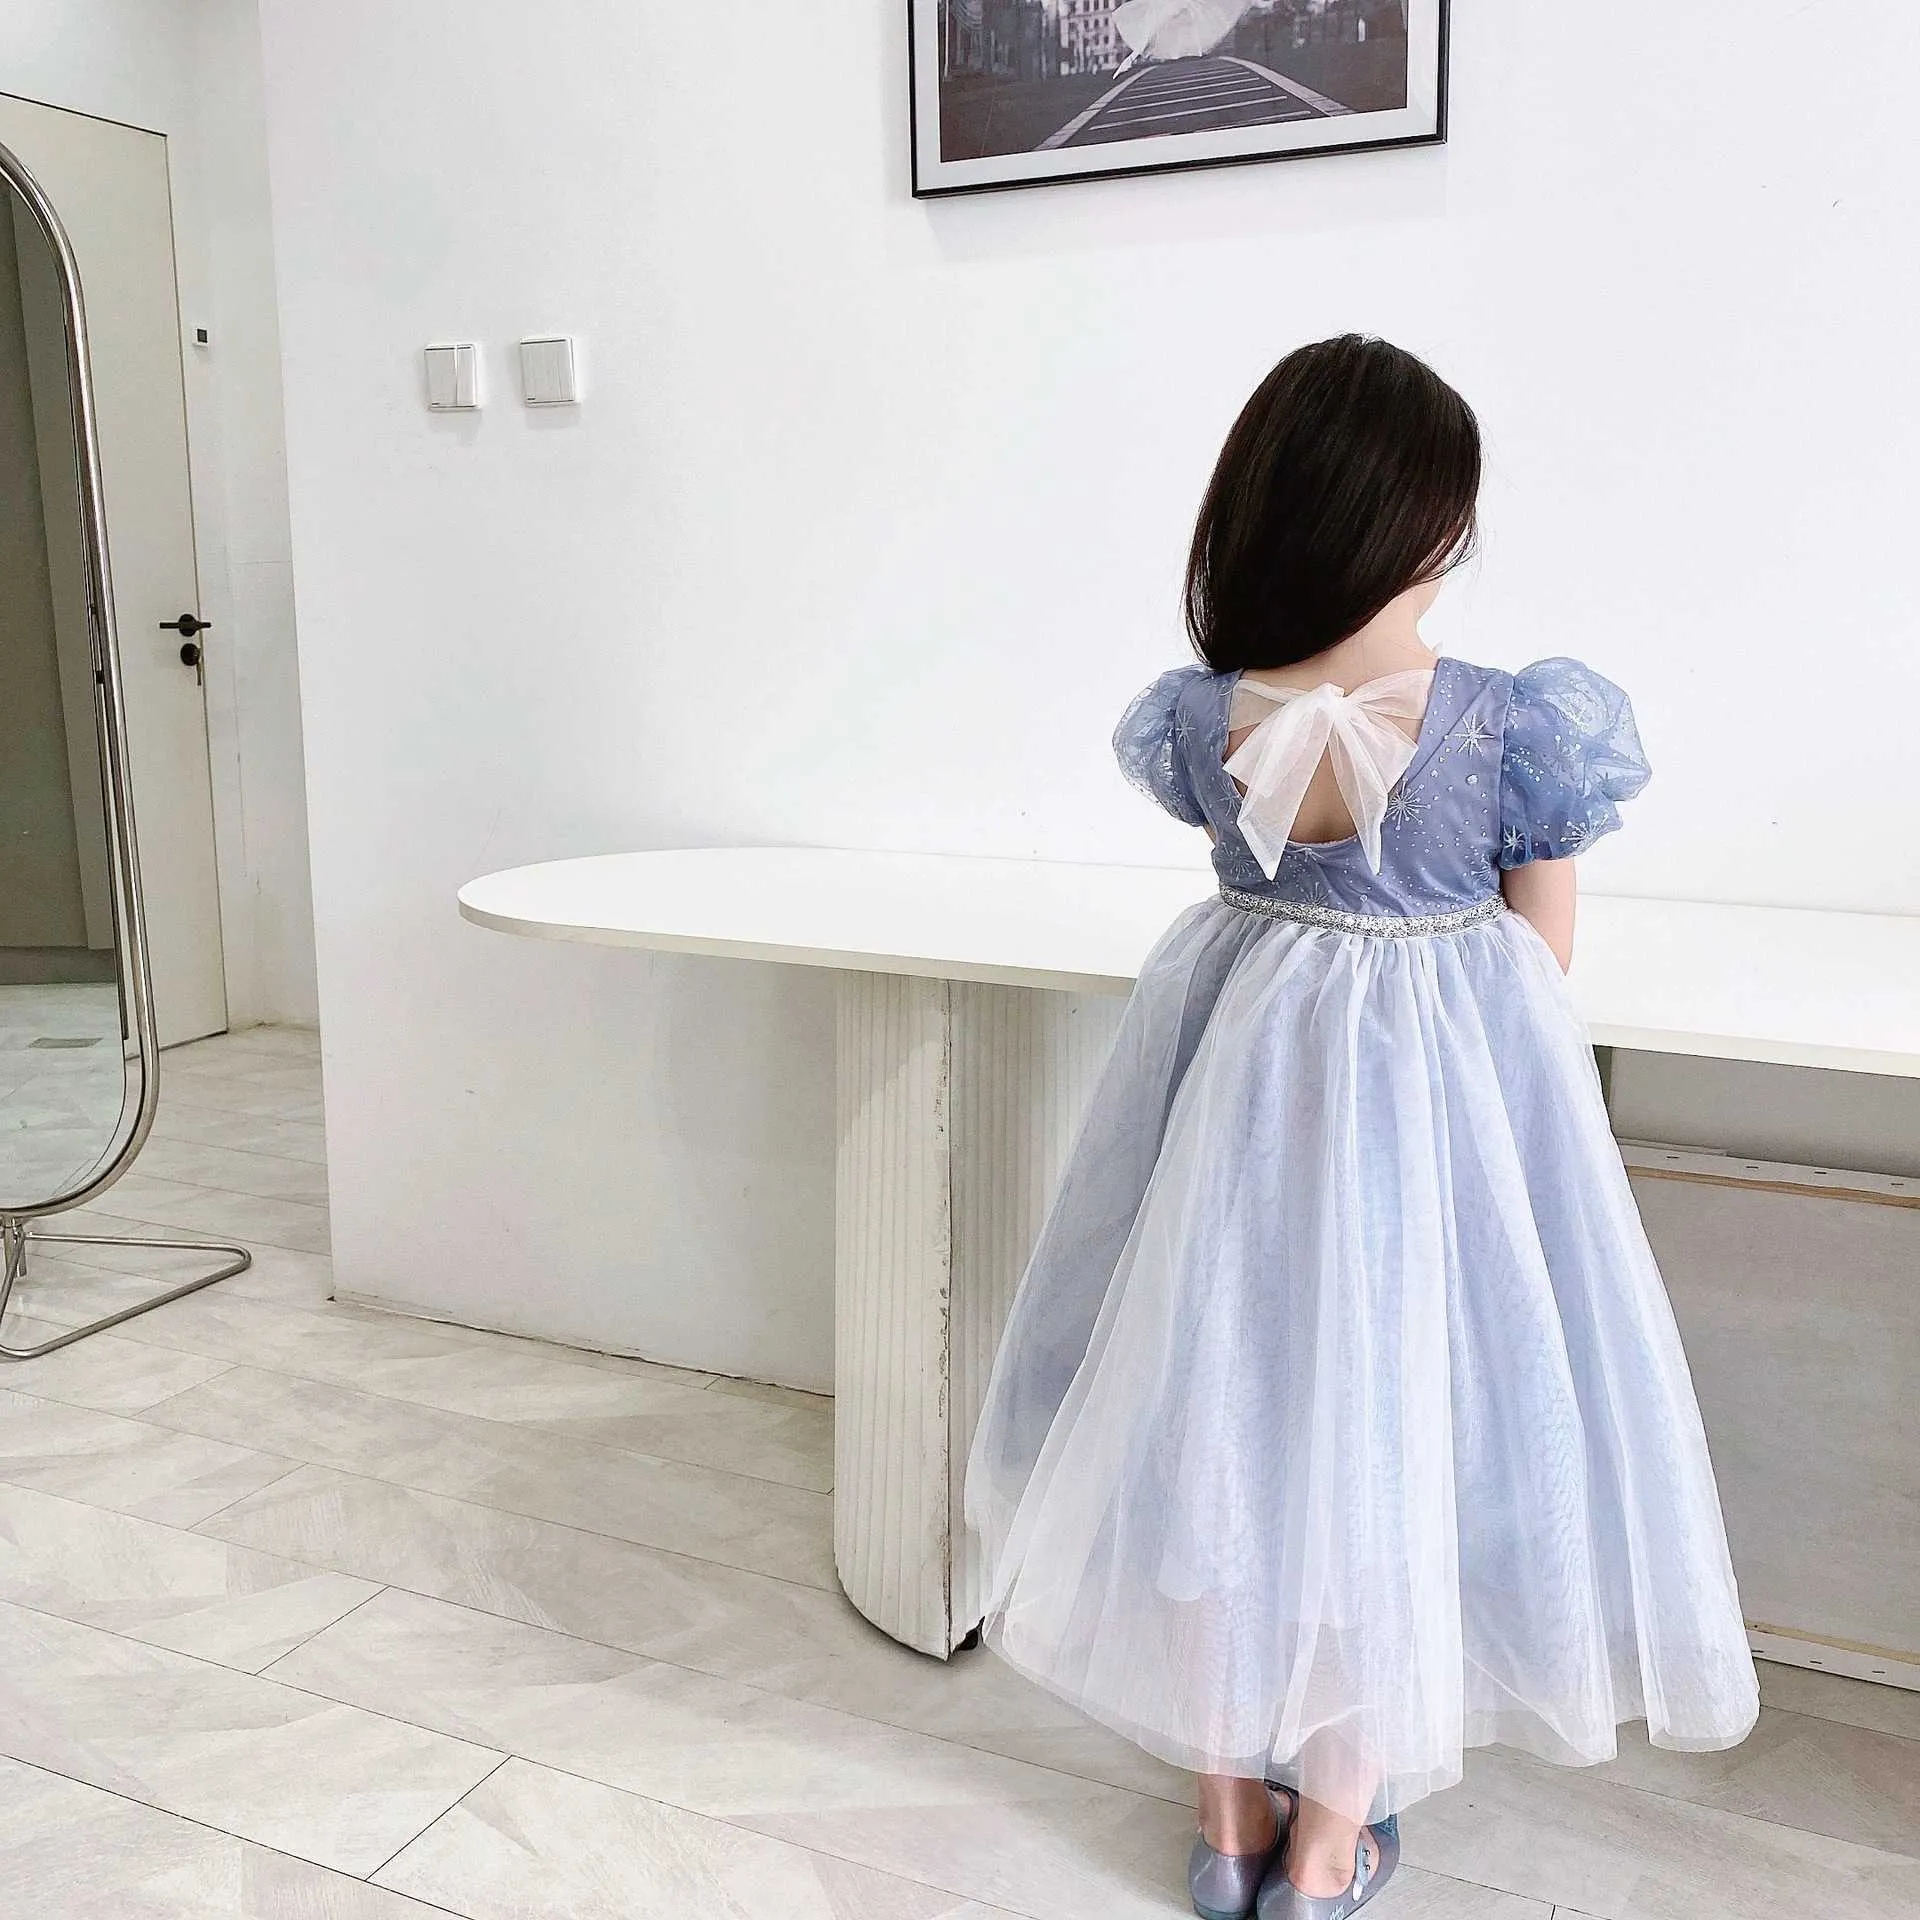 Princess Girls Dress Snowflakes Ice Blue Tulle with Bows Lovely Children Lolita Party Gown Cltohing 210529